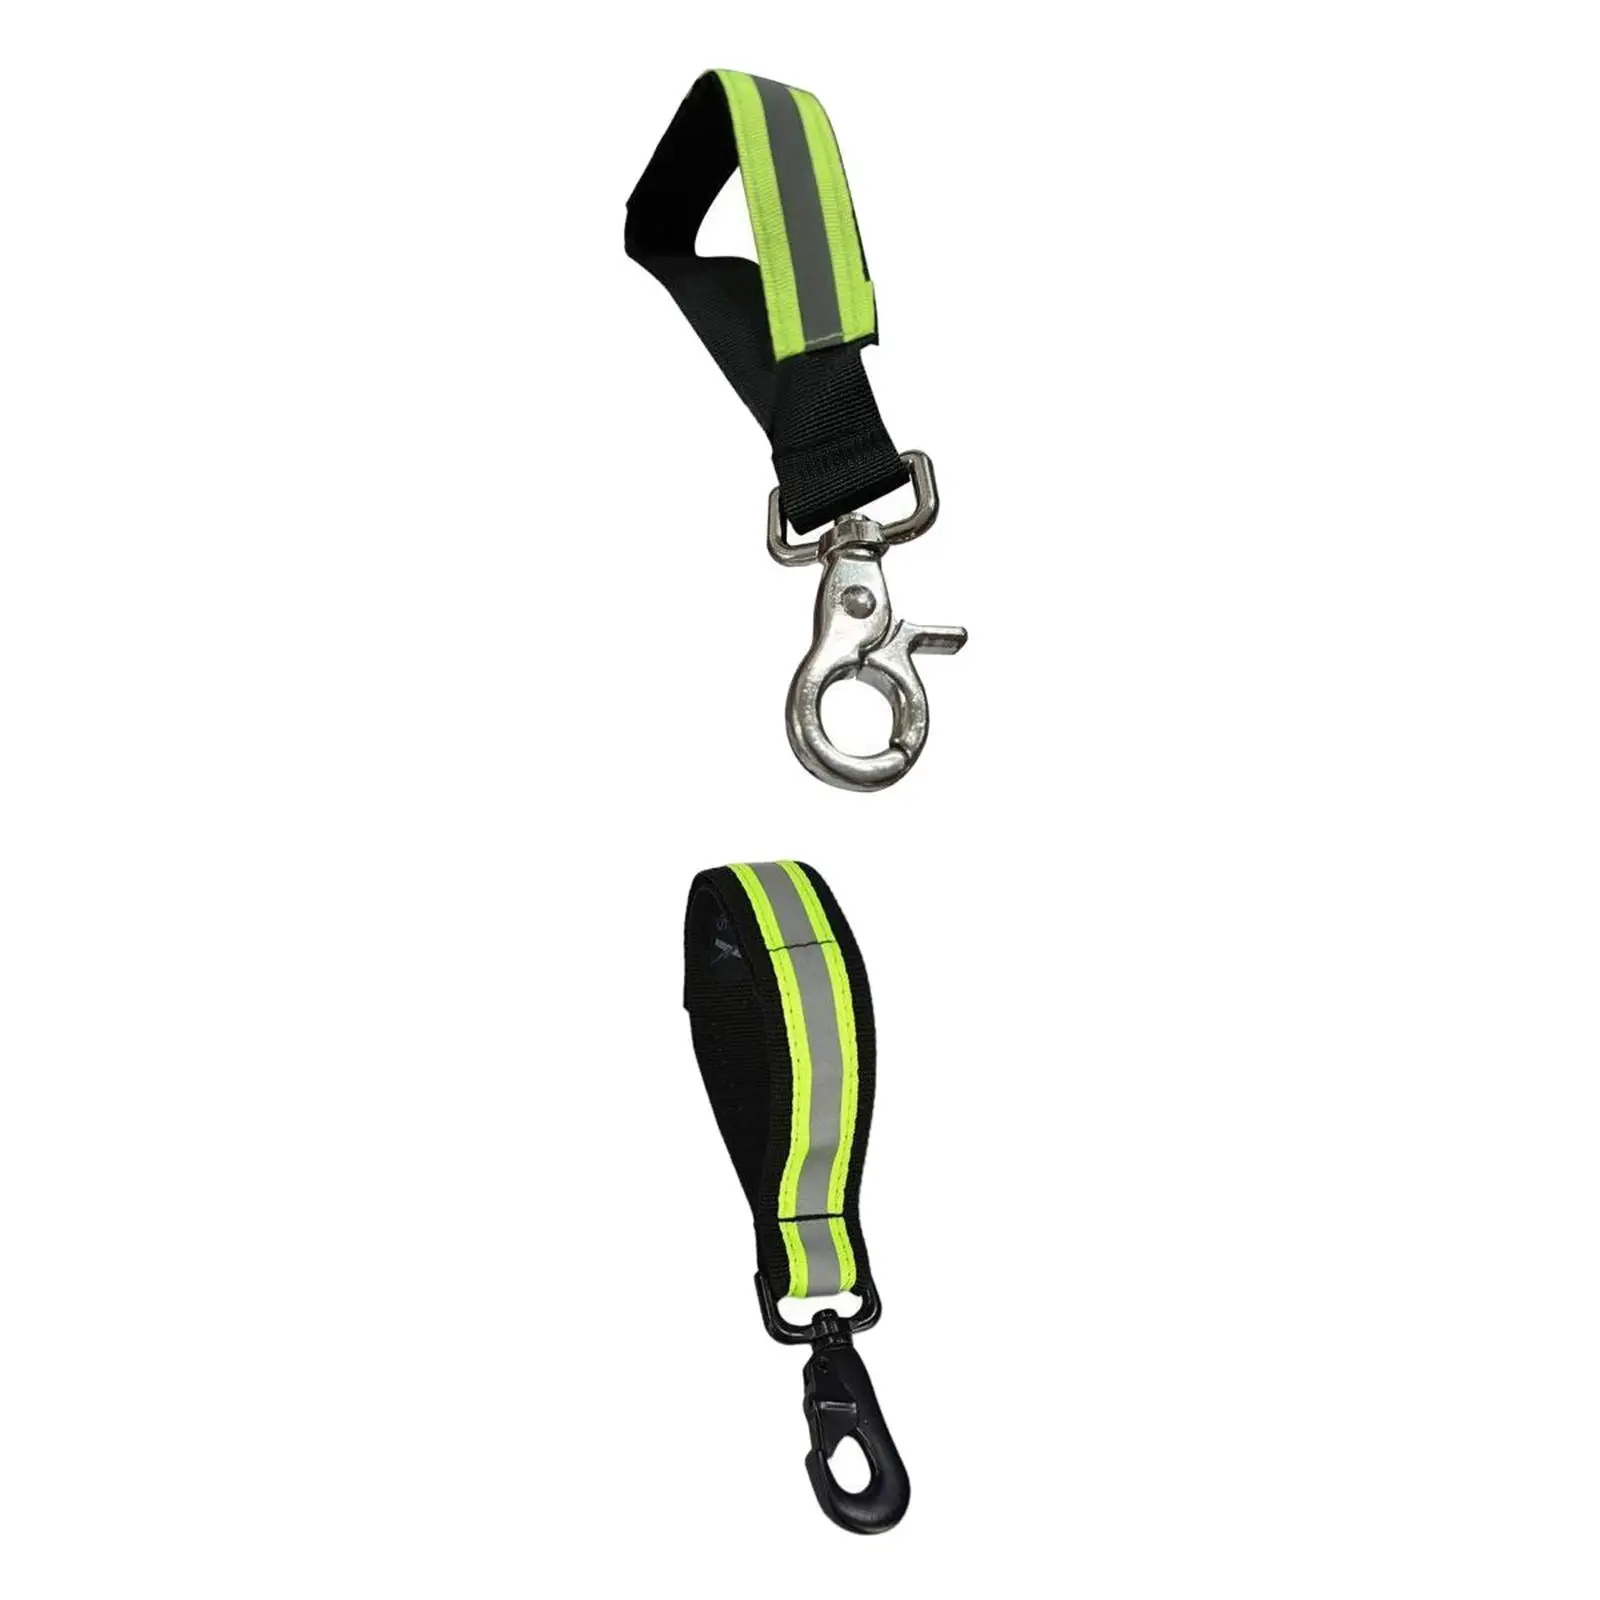 2pcs Firefighter Glove Strap,, Fireman Turnout Gear, Reflective with Buckle Tool Heavy Duty for Welding Gloves Accessories